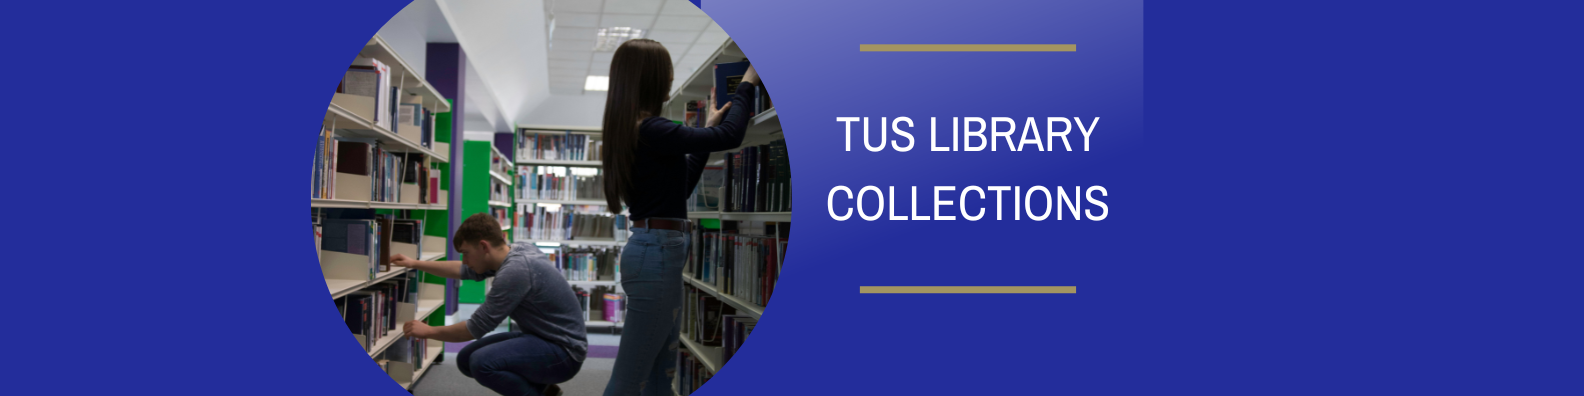 TUS library collections